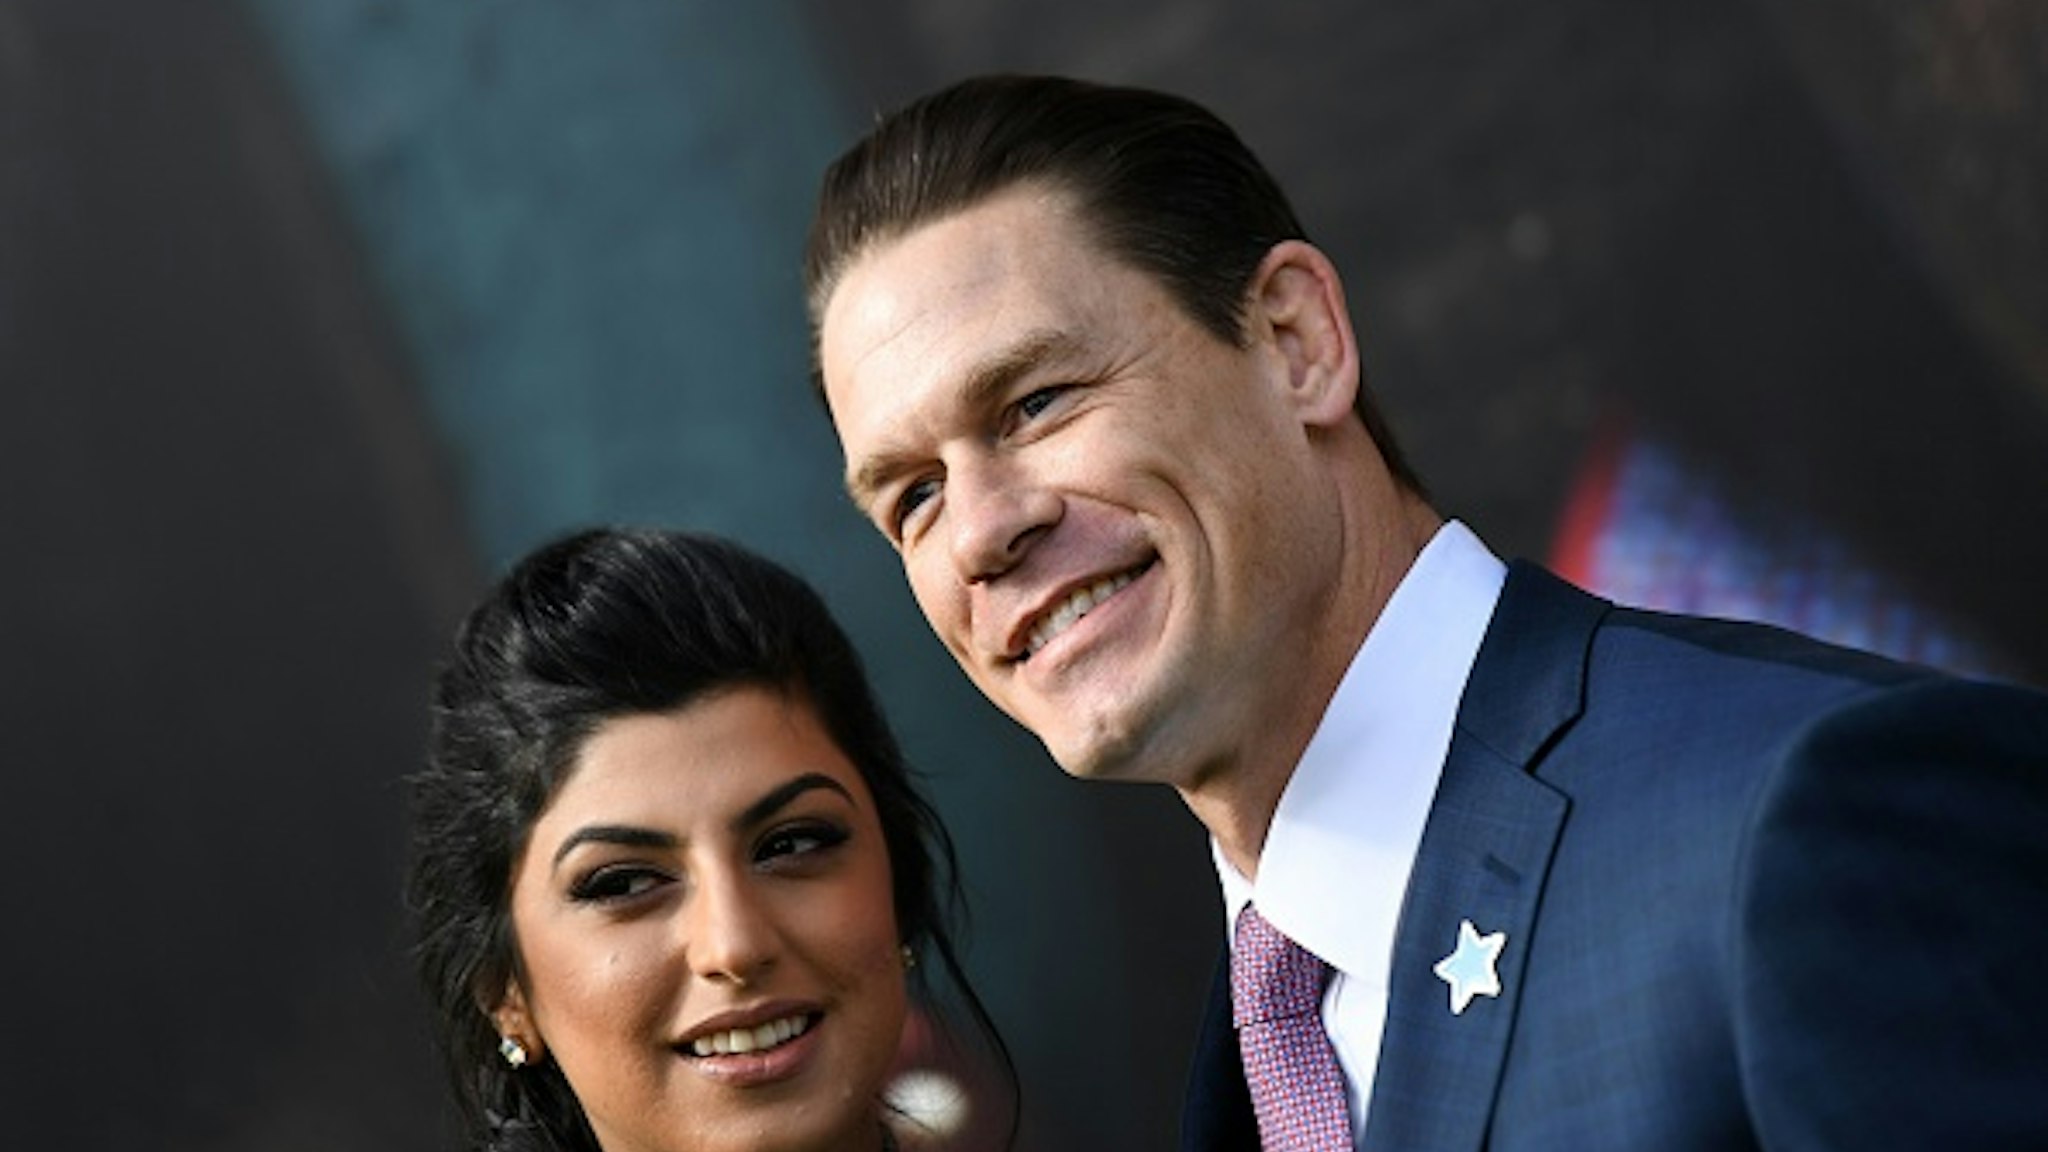 Shay Shariatzadeh (L) and actor John Cena attend the Premiere of the movie "Dolittle" at the Regency Village Theater, in Westwood, California, on January 11, 2020.